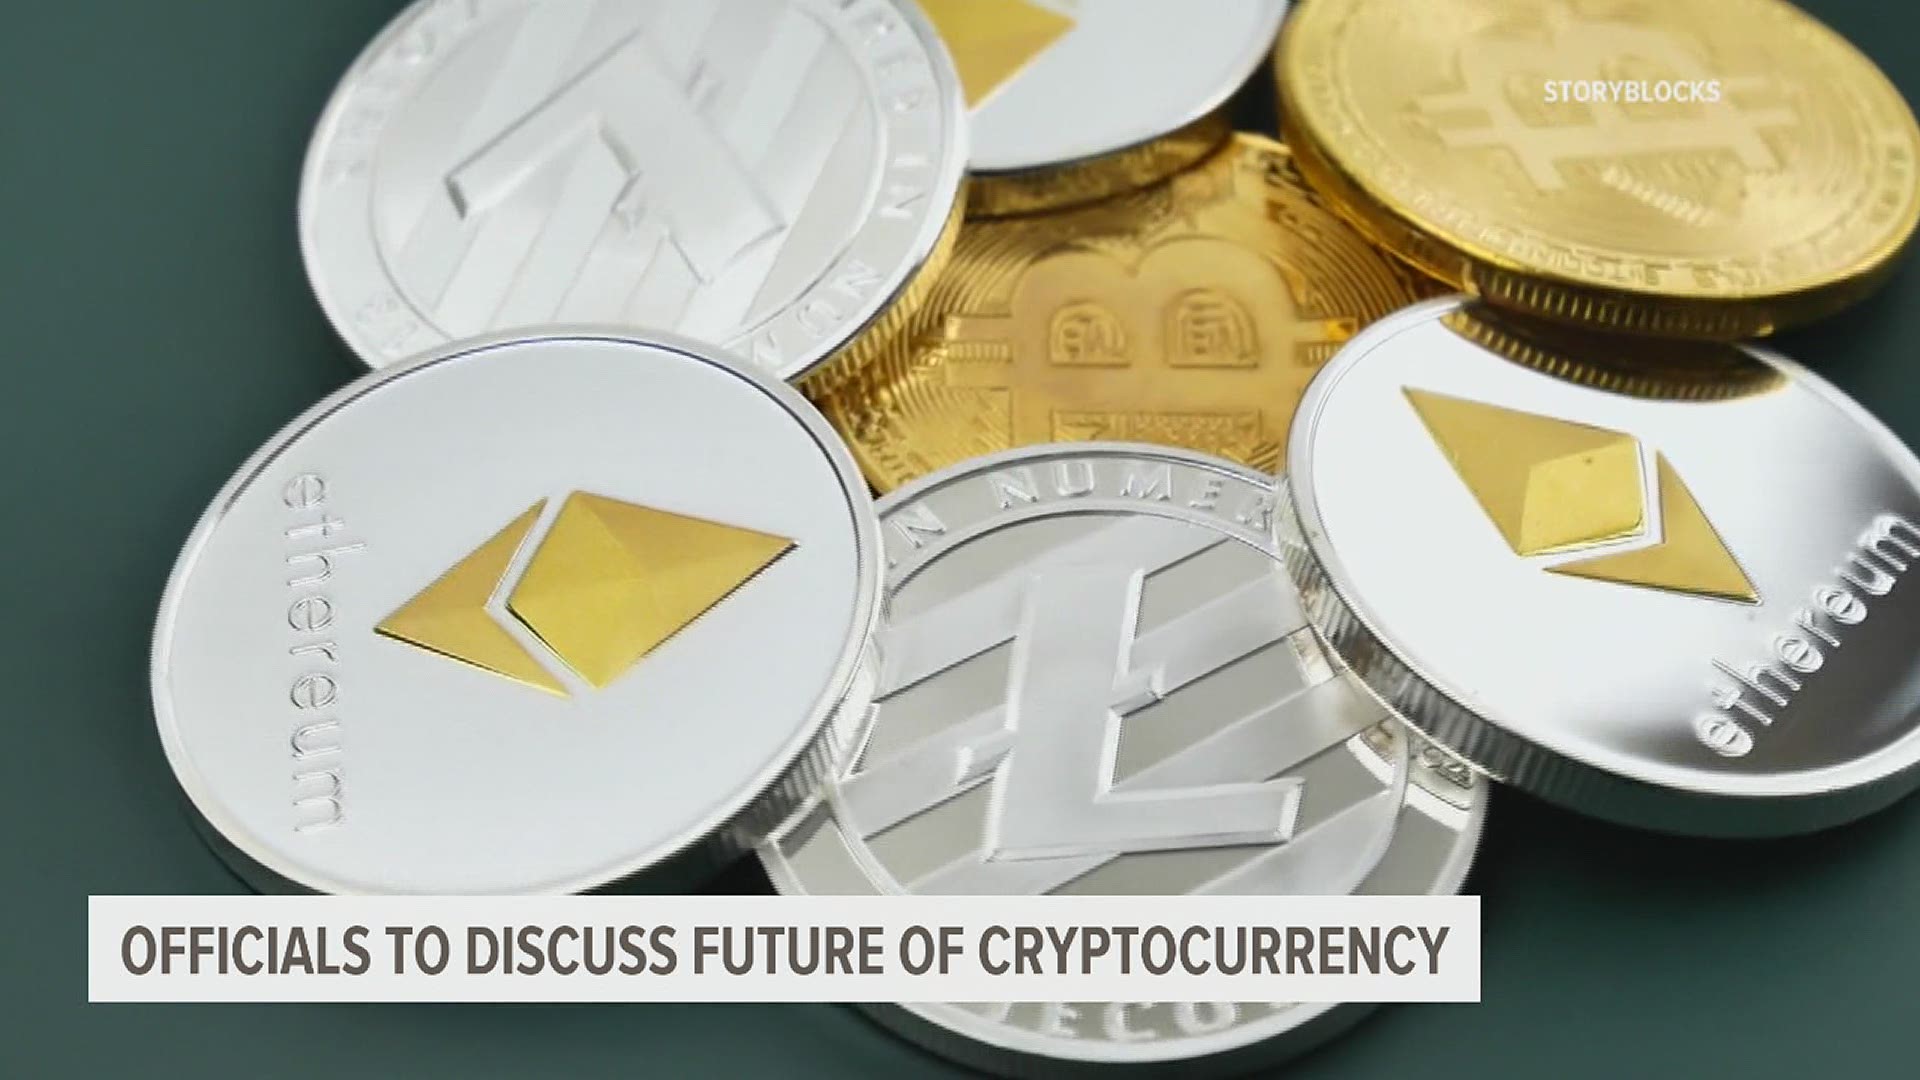 Cryptocurrencies will mostly be the focus of Monday's House Democratic Committee hearing. Monday's hearing is at 10 a.m. at the Capitol.